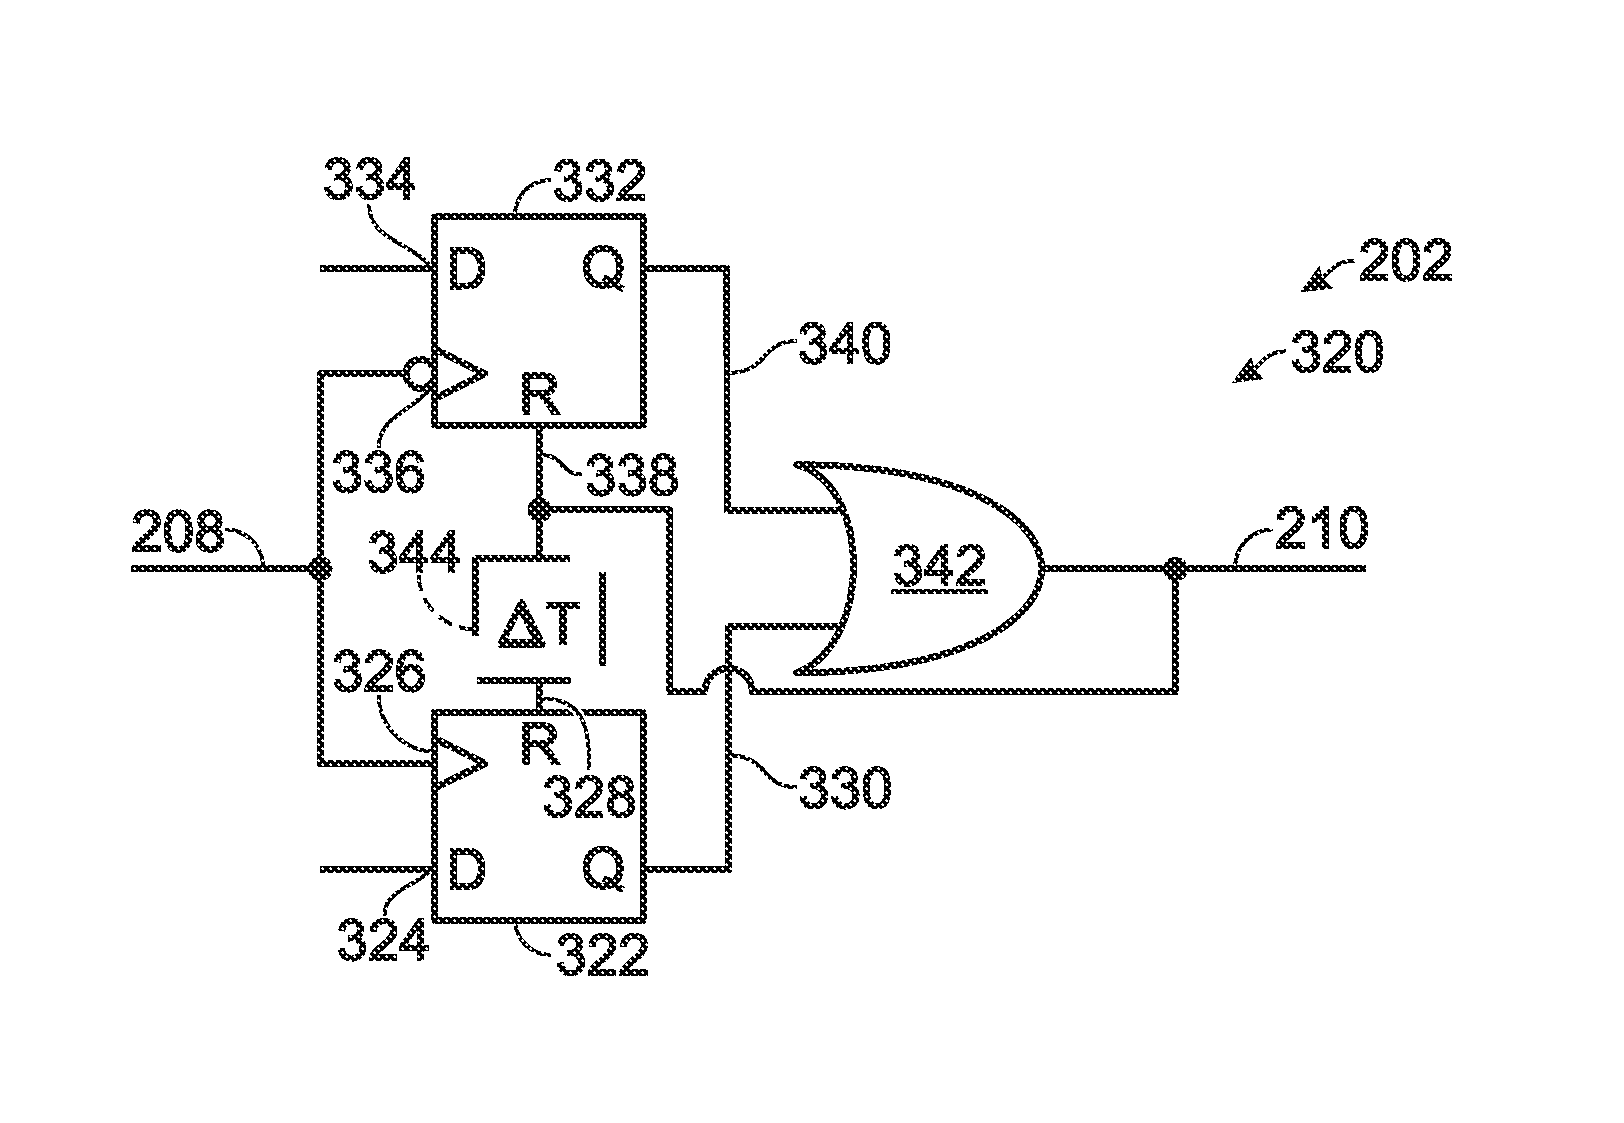 Delta modulated low power EHF communication link